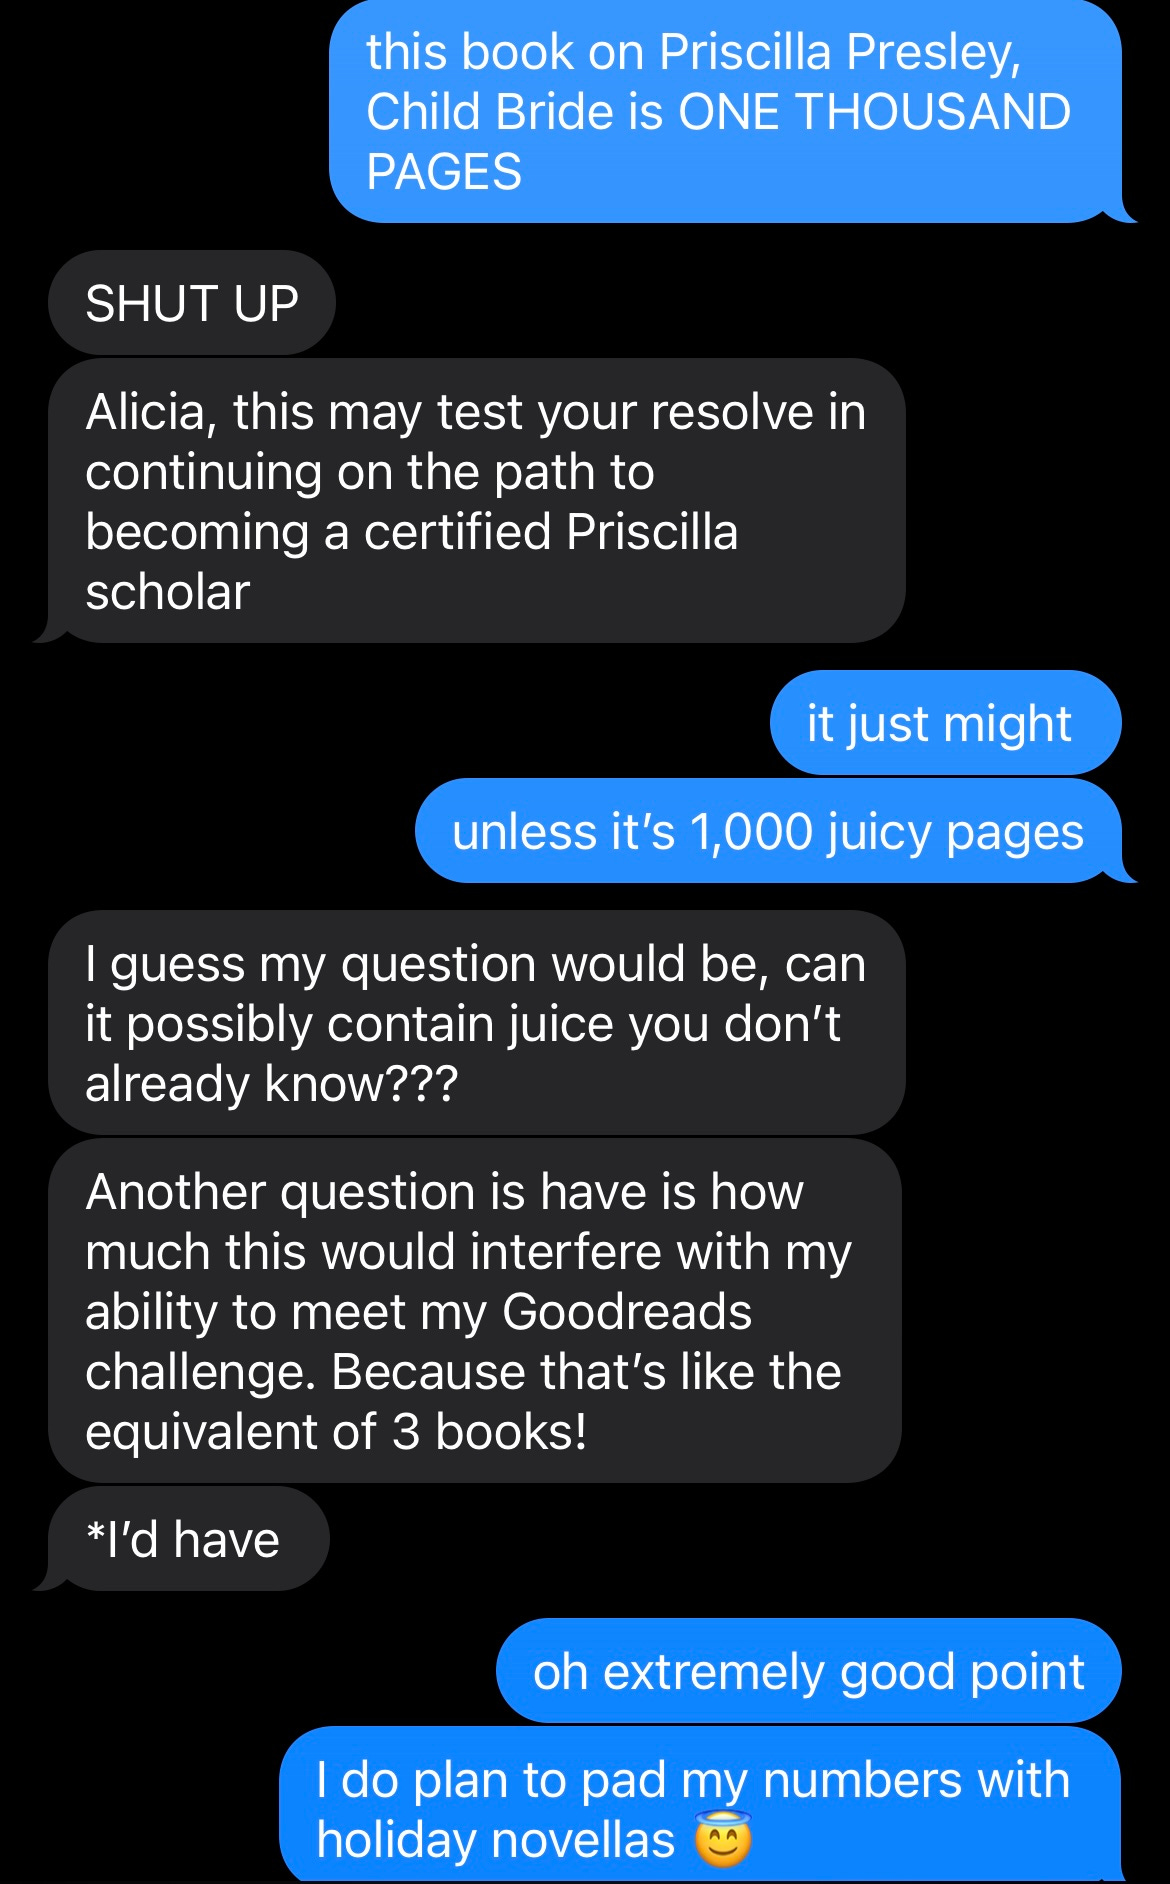 A screenshot of a text exchange between me and a friend, where I say: "this book on Priscilla Presley, Child Bride is ONE THOUSAND PAGES" and my friend says: "SHUT UP Alicia, this may test your resolve in continuing on the path to becoming a certified Priscilla scholar", Me: "it just might unless it's 1,000 juicy pages", My friend: "I guess my question would be, can it possibly contain juice you don't already know??? Another question is have is how much this would interfere with my ability to meet my Goodreads challenge. Because that's like the equivalent of 3 books! *I'd have," Me: "oh extremely good point I do plan to pad my numbers with holiday novellas"